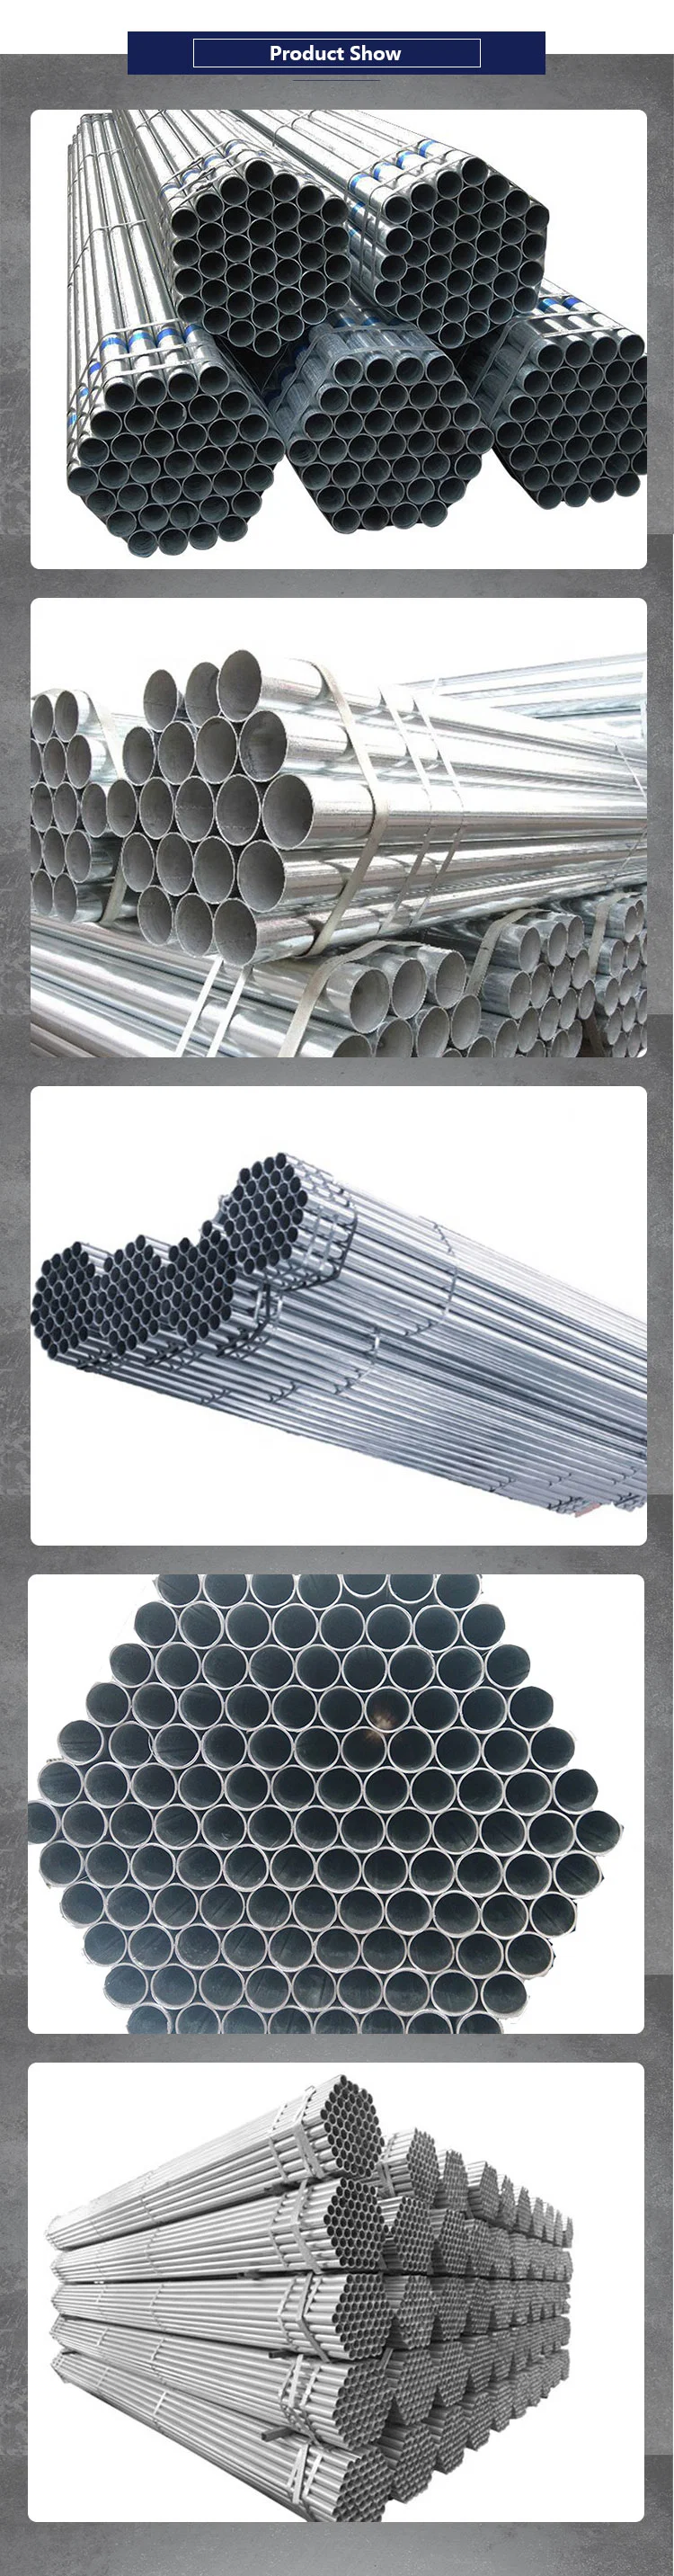 ASTM A252 Pre Galvanized Steel Hollow Section Round Pipe Tube Hot DIP Seamless Gi Pipe Tube